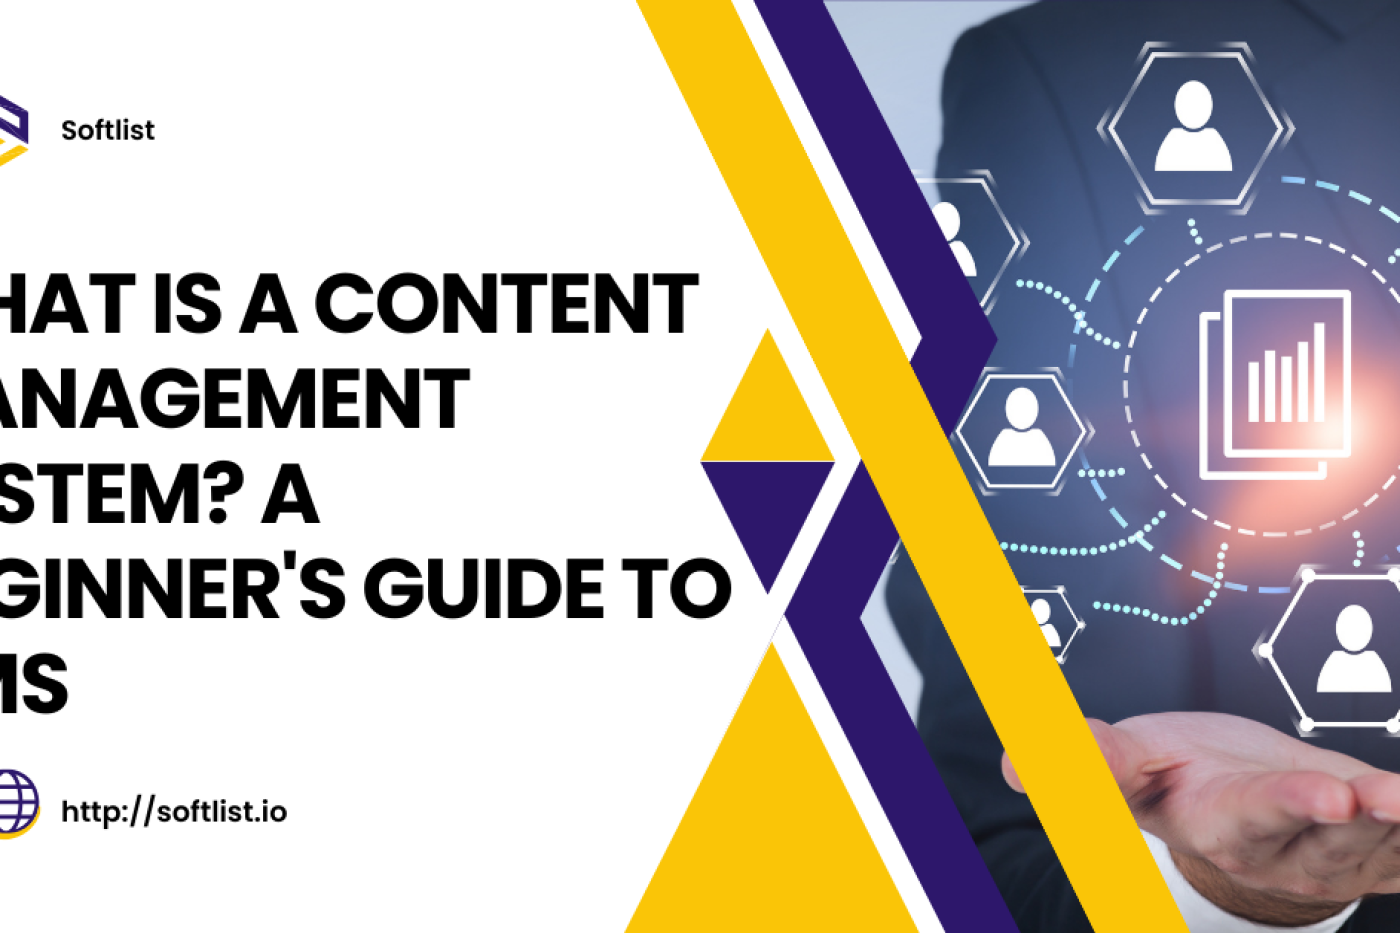 What Is a Content Management System? A Beginner's Guide to CMS